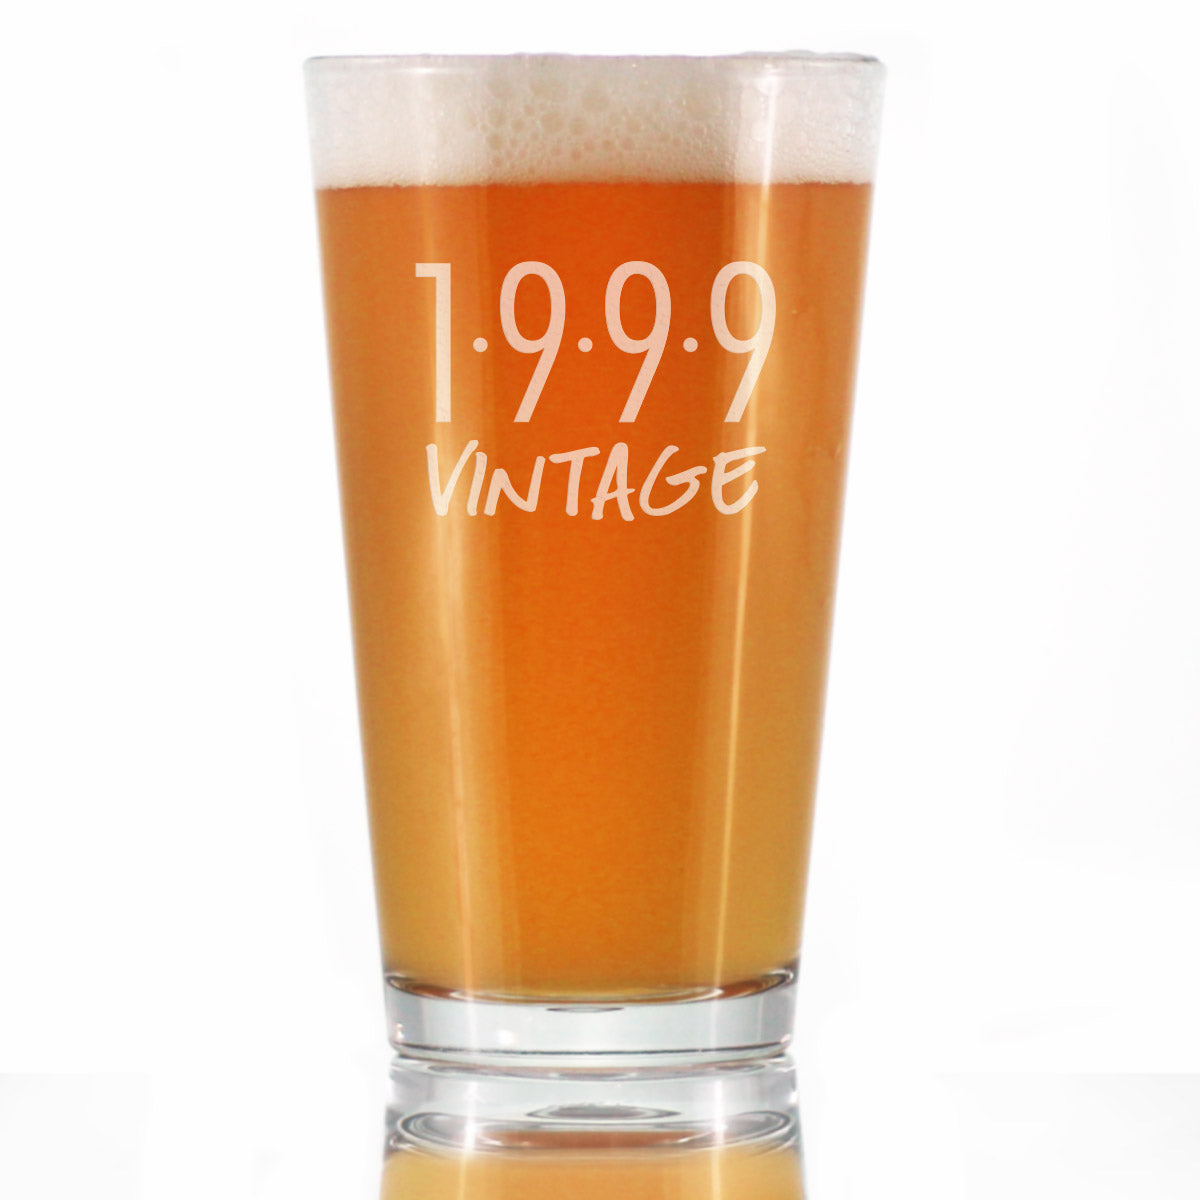 Vintage 1999 - Pint Glass for Beer - 25th Birthday Gifts for Men or Women Turning 25 - Fun Bday Party Decor - 16 oz